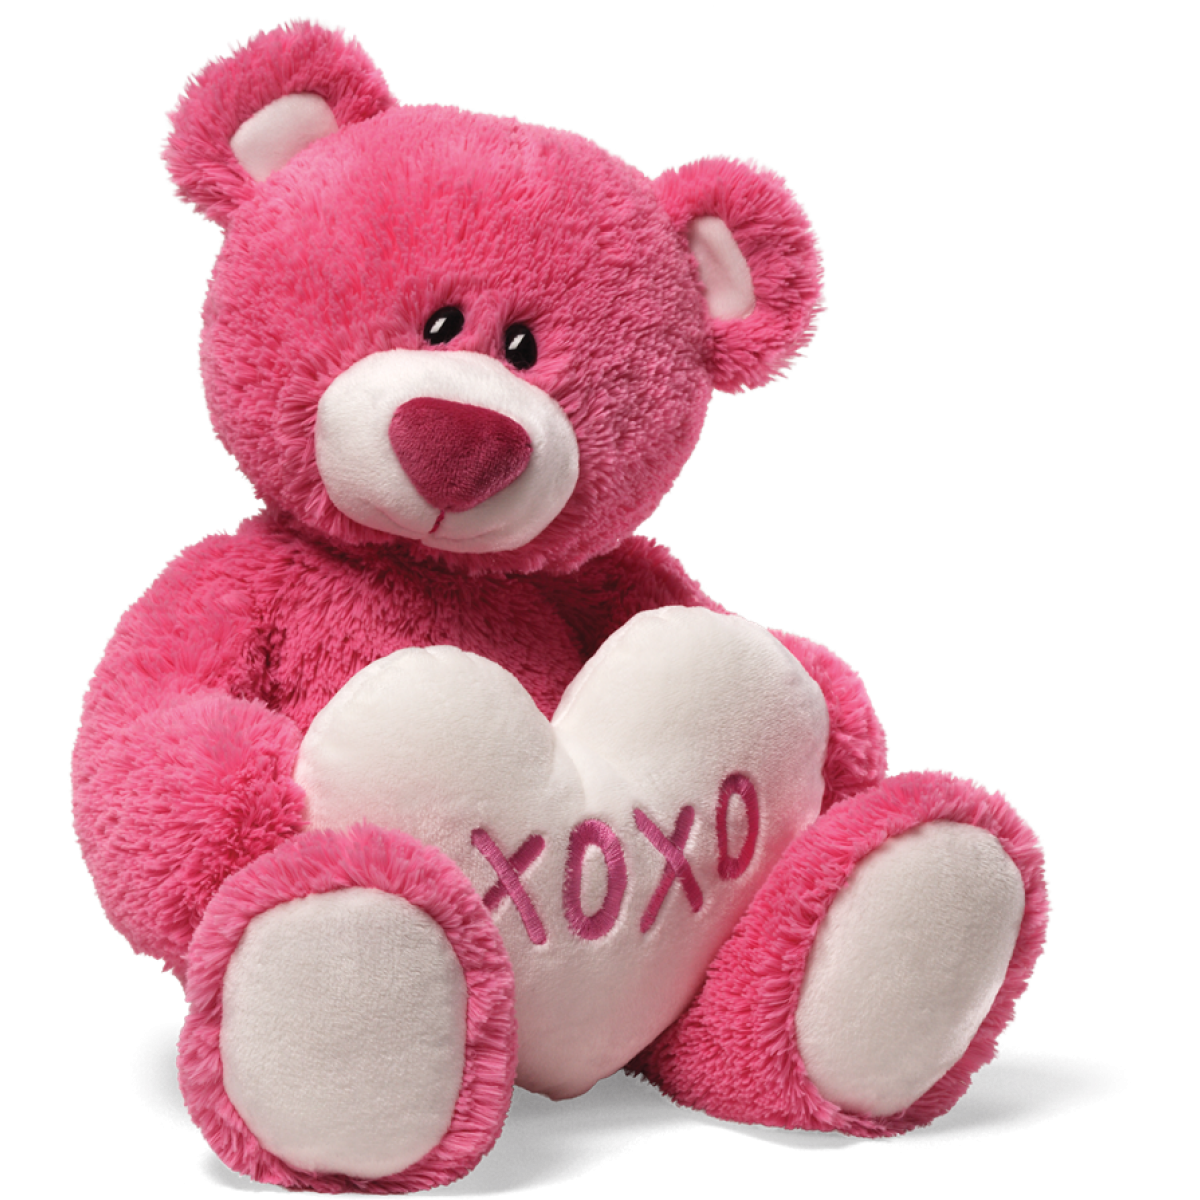 Teddy Bear day is day of Love